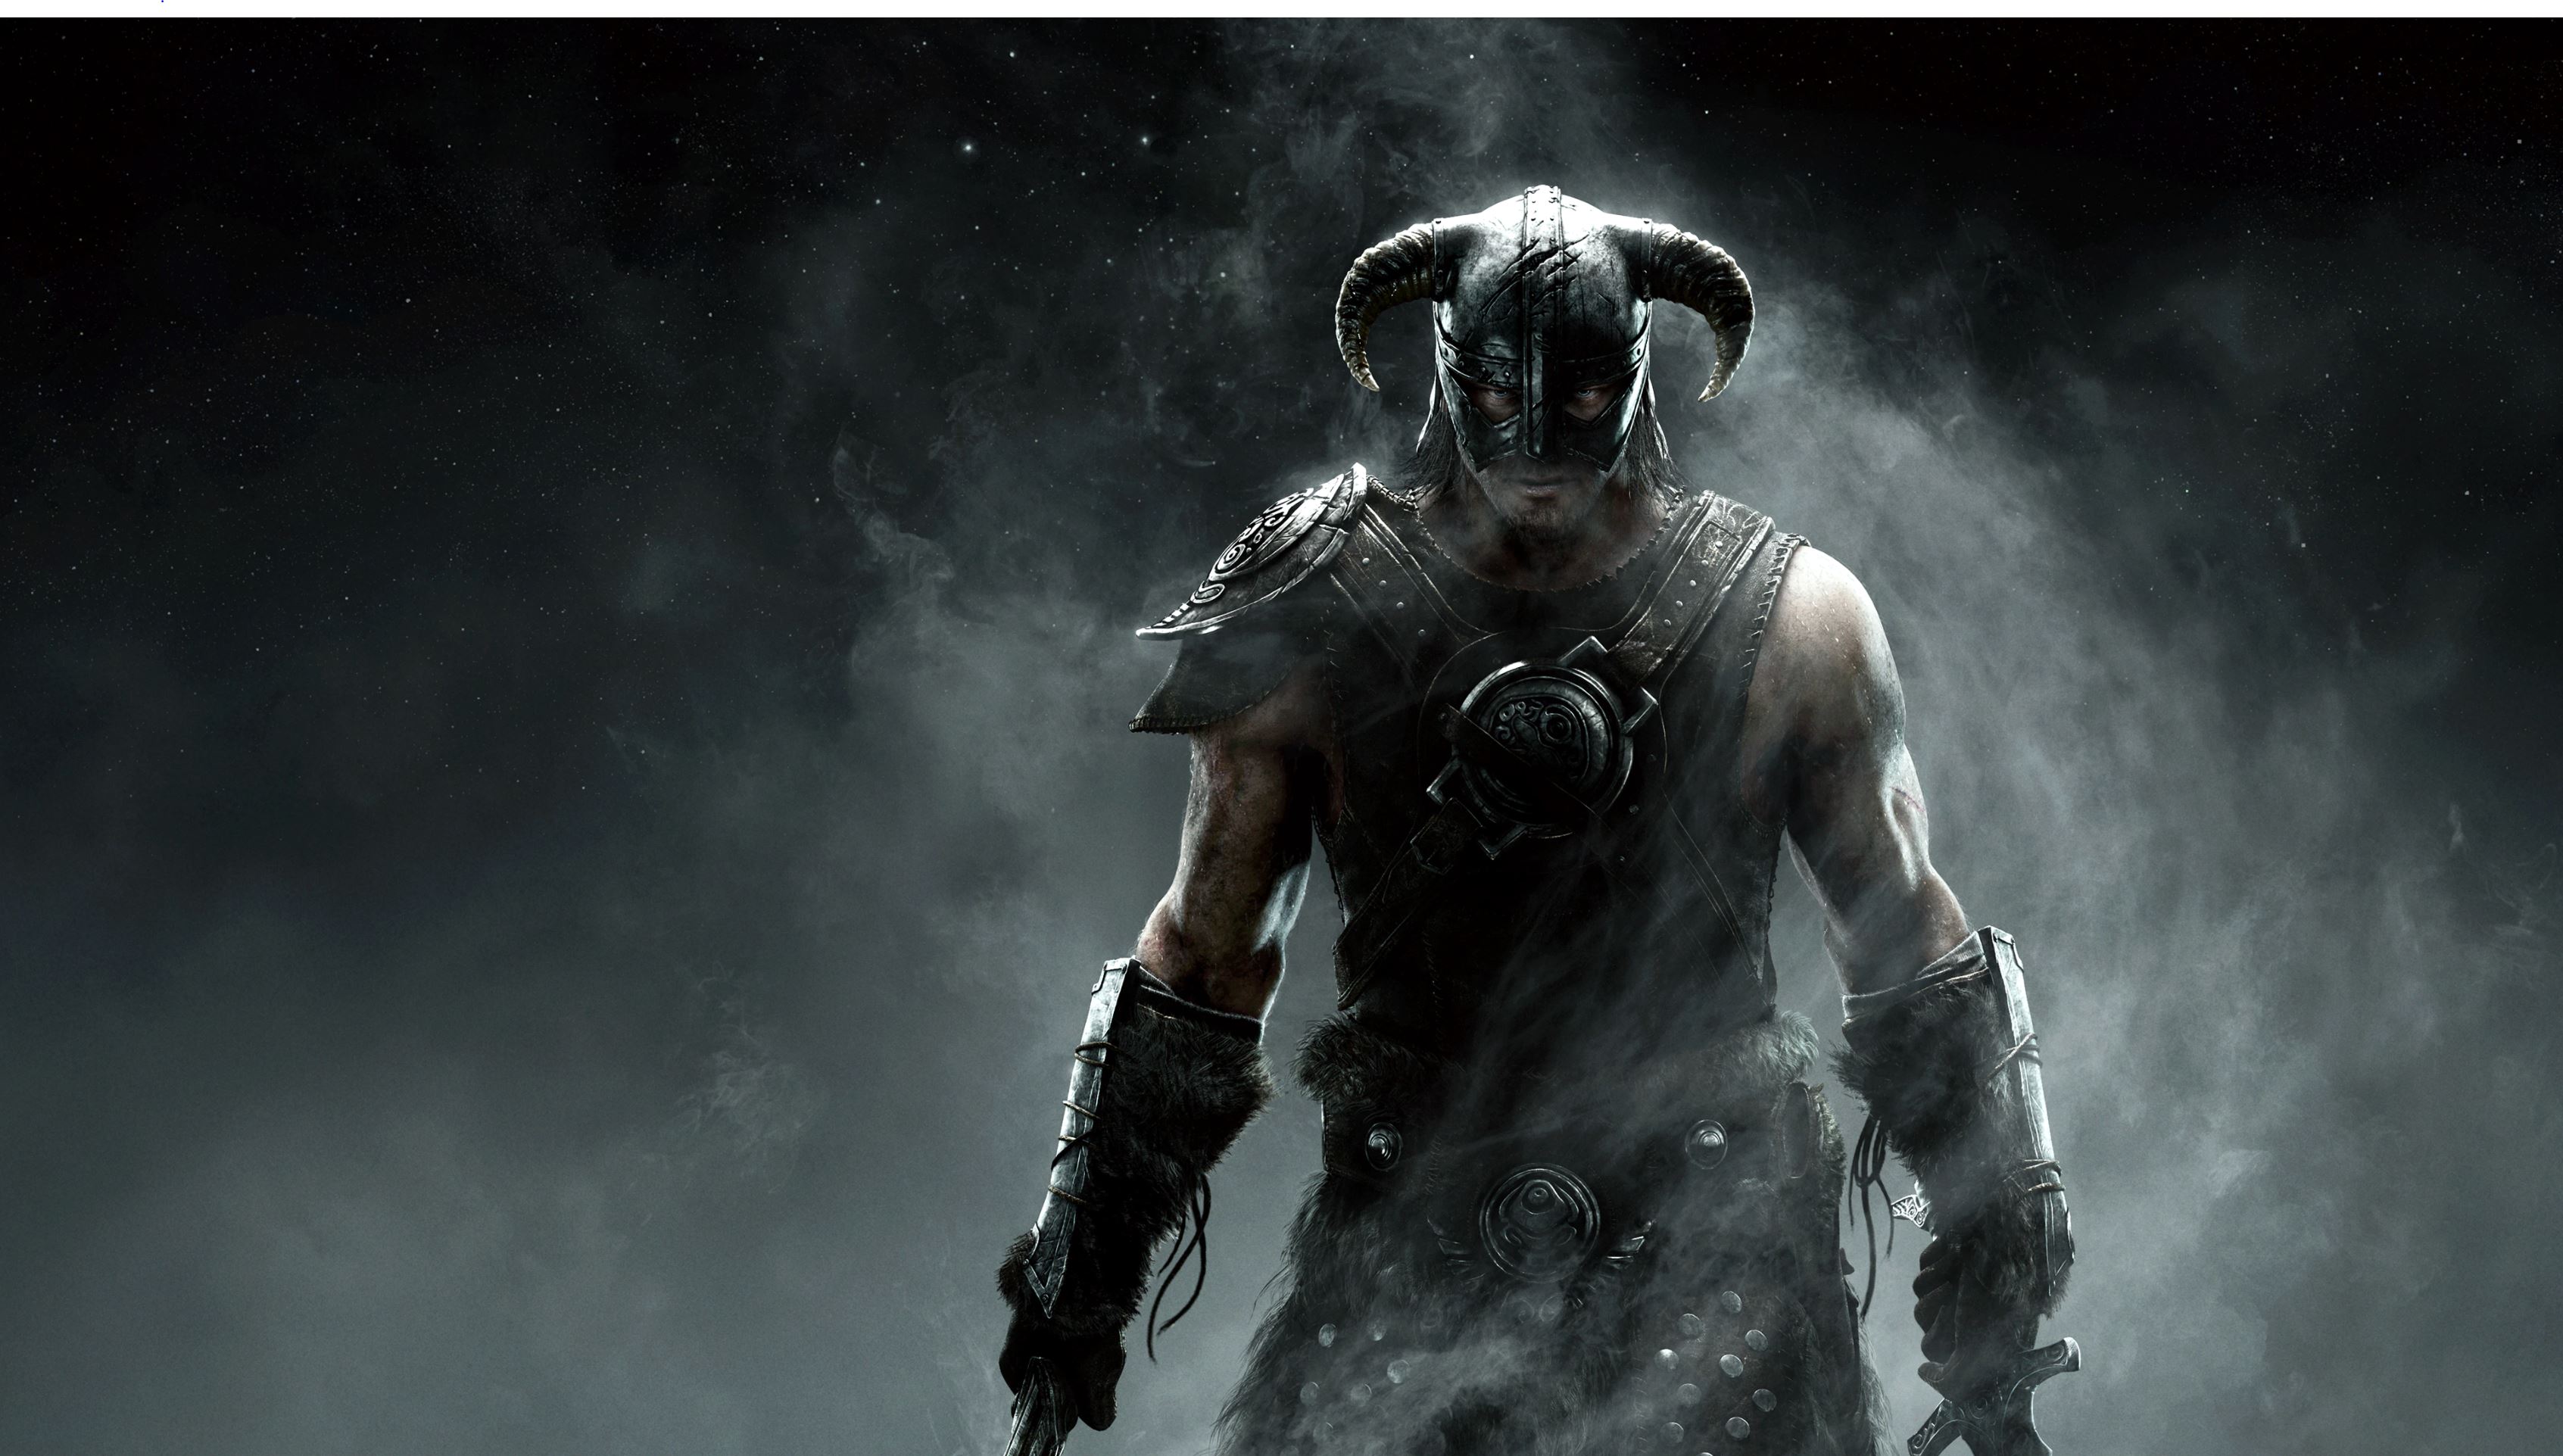 The Elder Scrolls 6's Xbox Exclusivity Doesn't Make It a System Seller